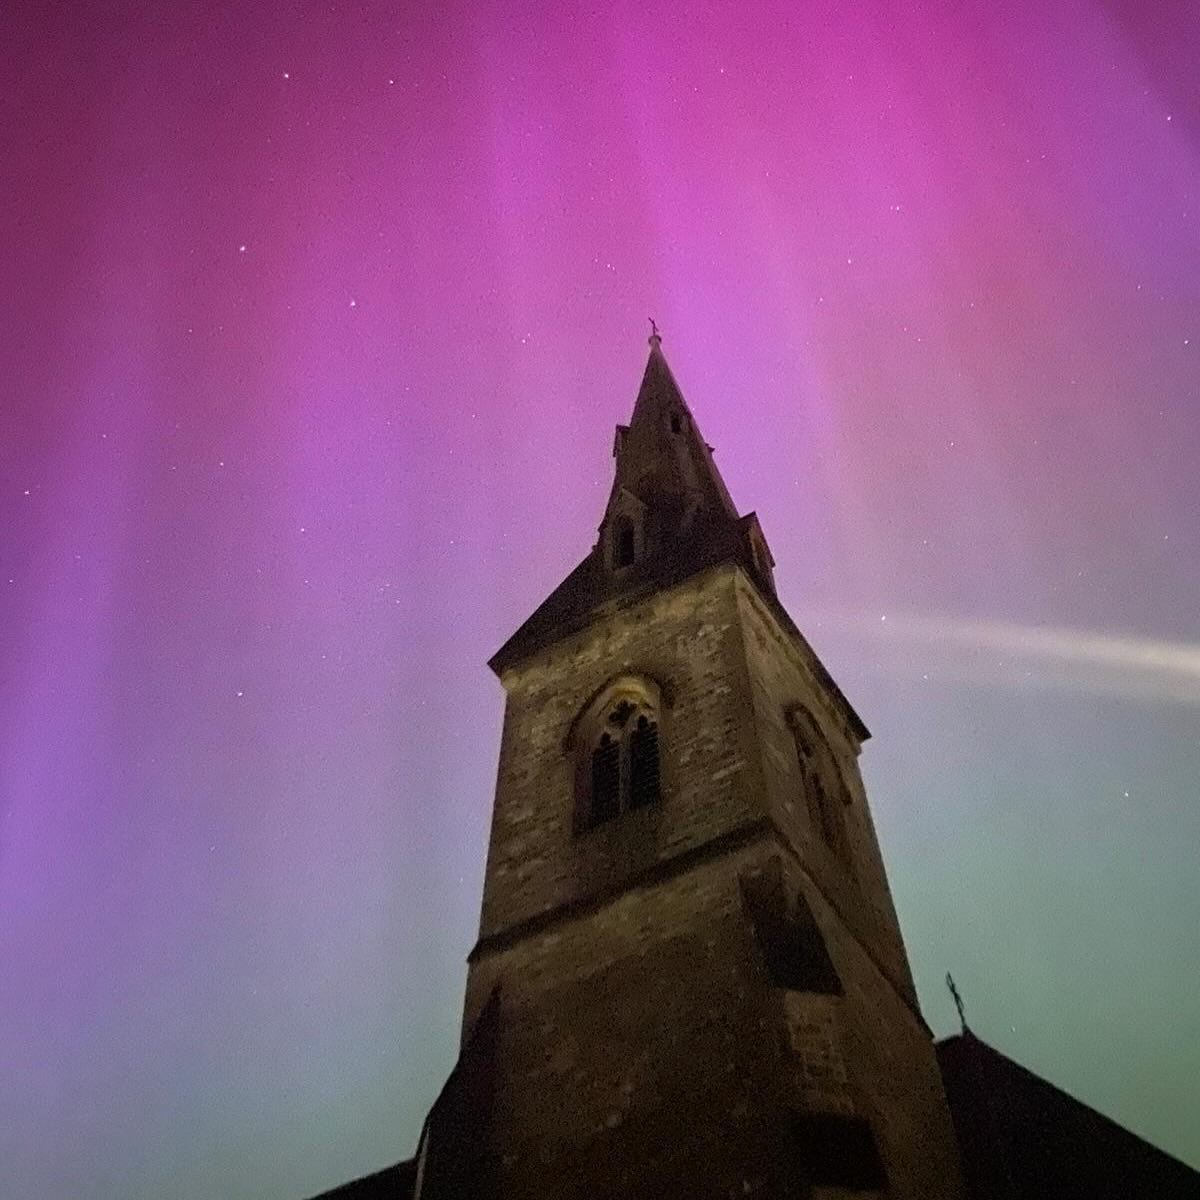 Well that&rsquo;s not how every Ascension Day ends🤯 Thanks to one of our students for snapping this pic of our church tower below the amazing Northern Lights last night! 💫